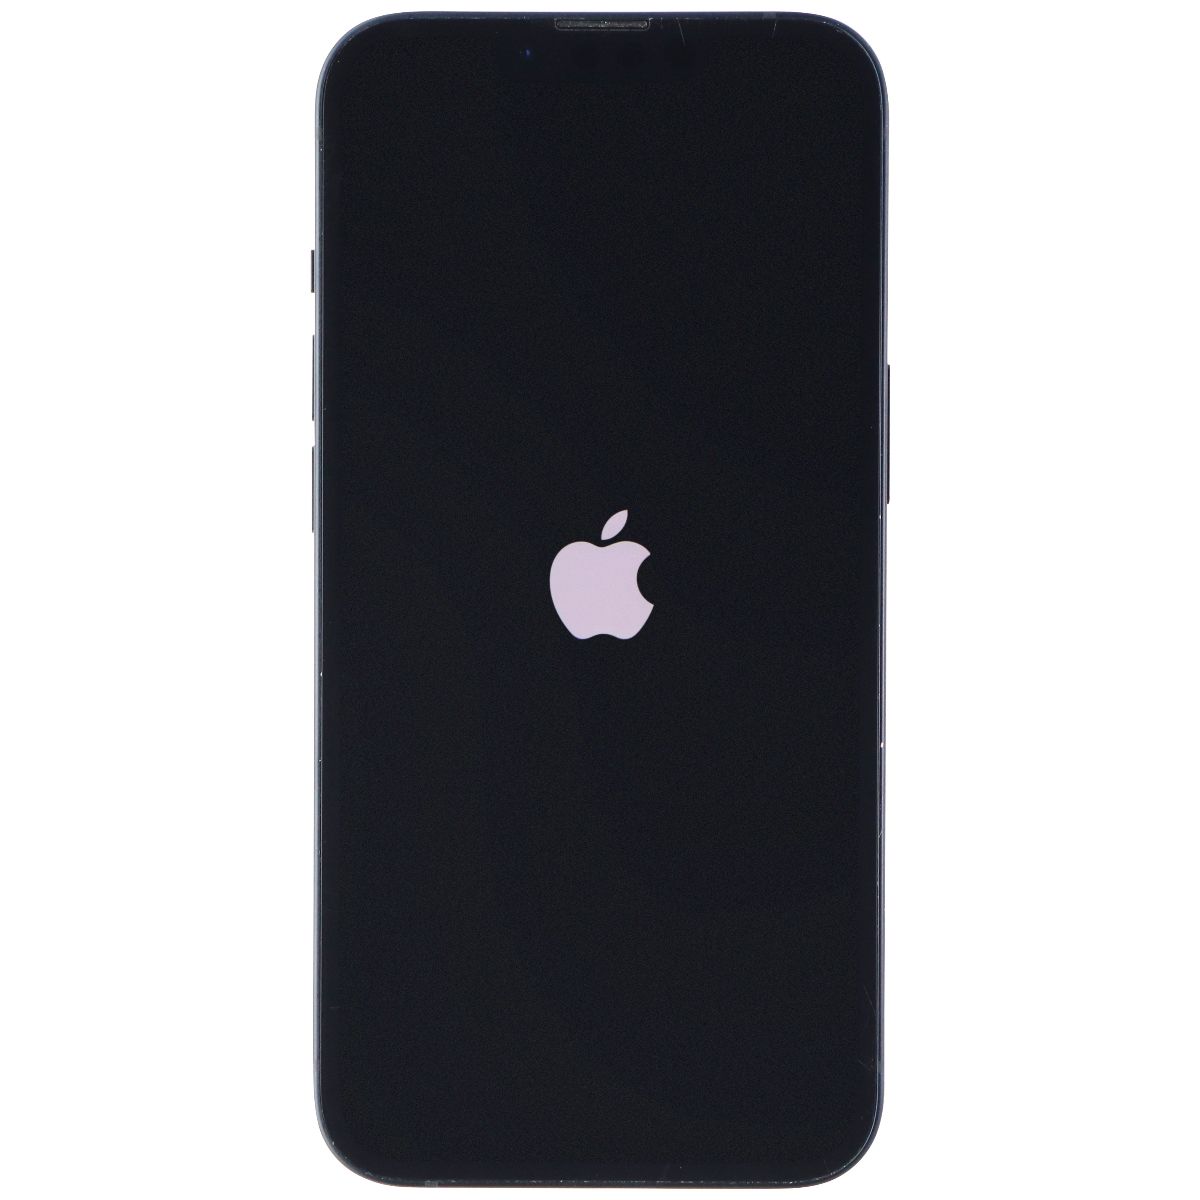 Apple iPhone 13 (6.1-in) Smartphone (A2482) Unlocked - 128GB/Midnight BAD GYRO* Cell Phones & Smartphones Apple    - Simple Cell Bulk Wholesale Pricing - USA Seller